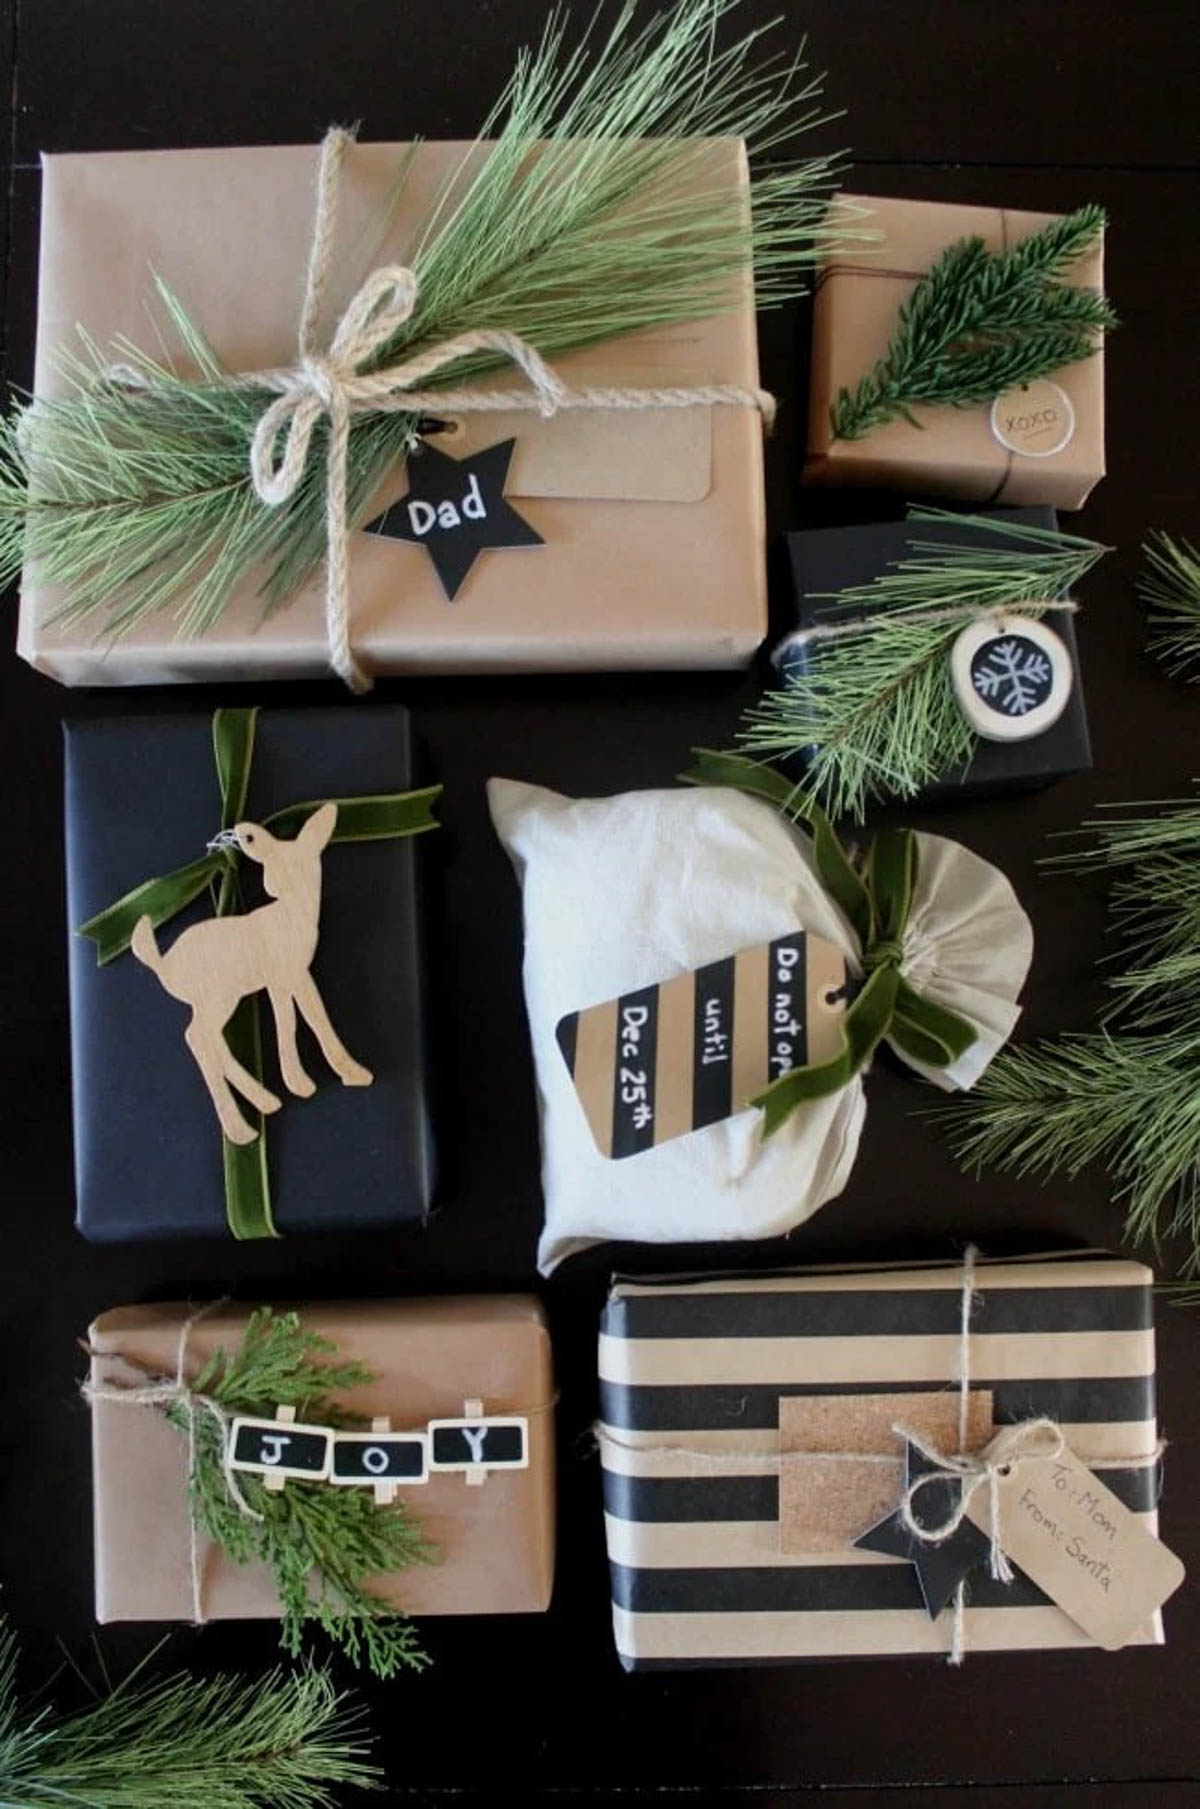 Multiple gifts wrapped in rustic gift wrapping paper